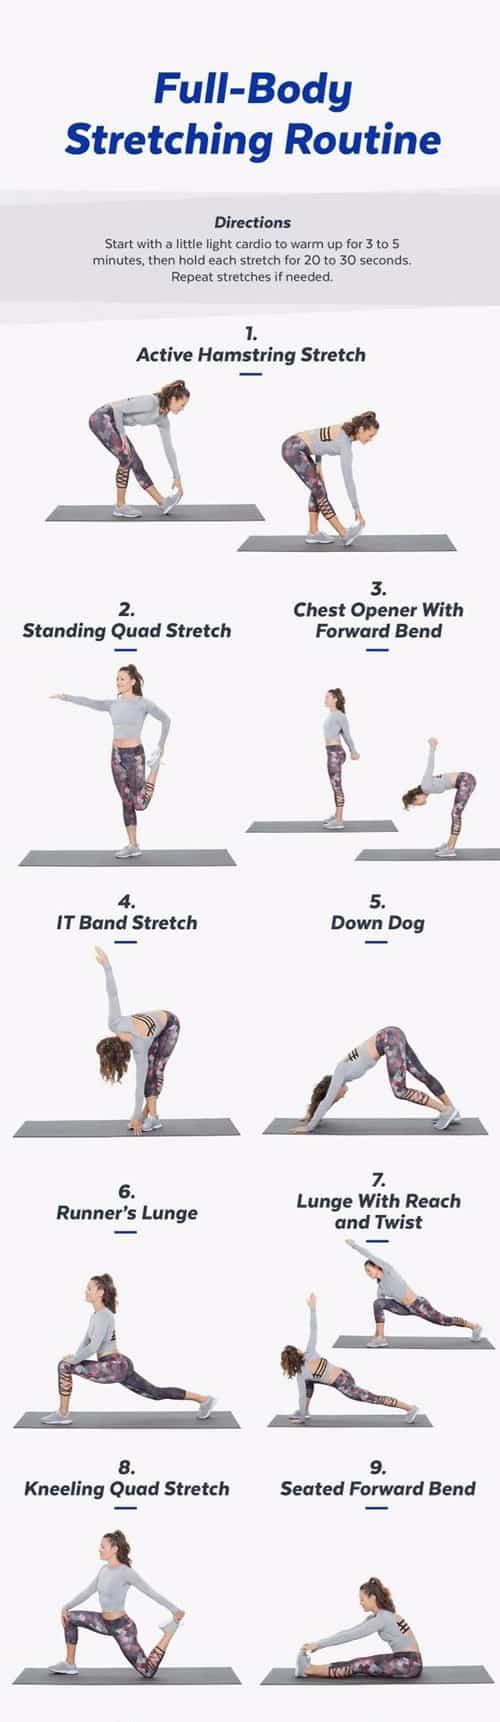 12 Stretching Routines To Rehabilitate Your Body - Ideal Me